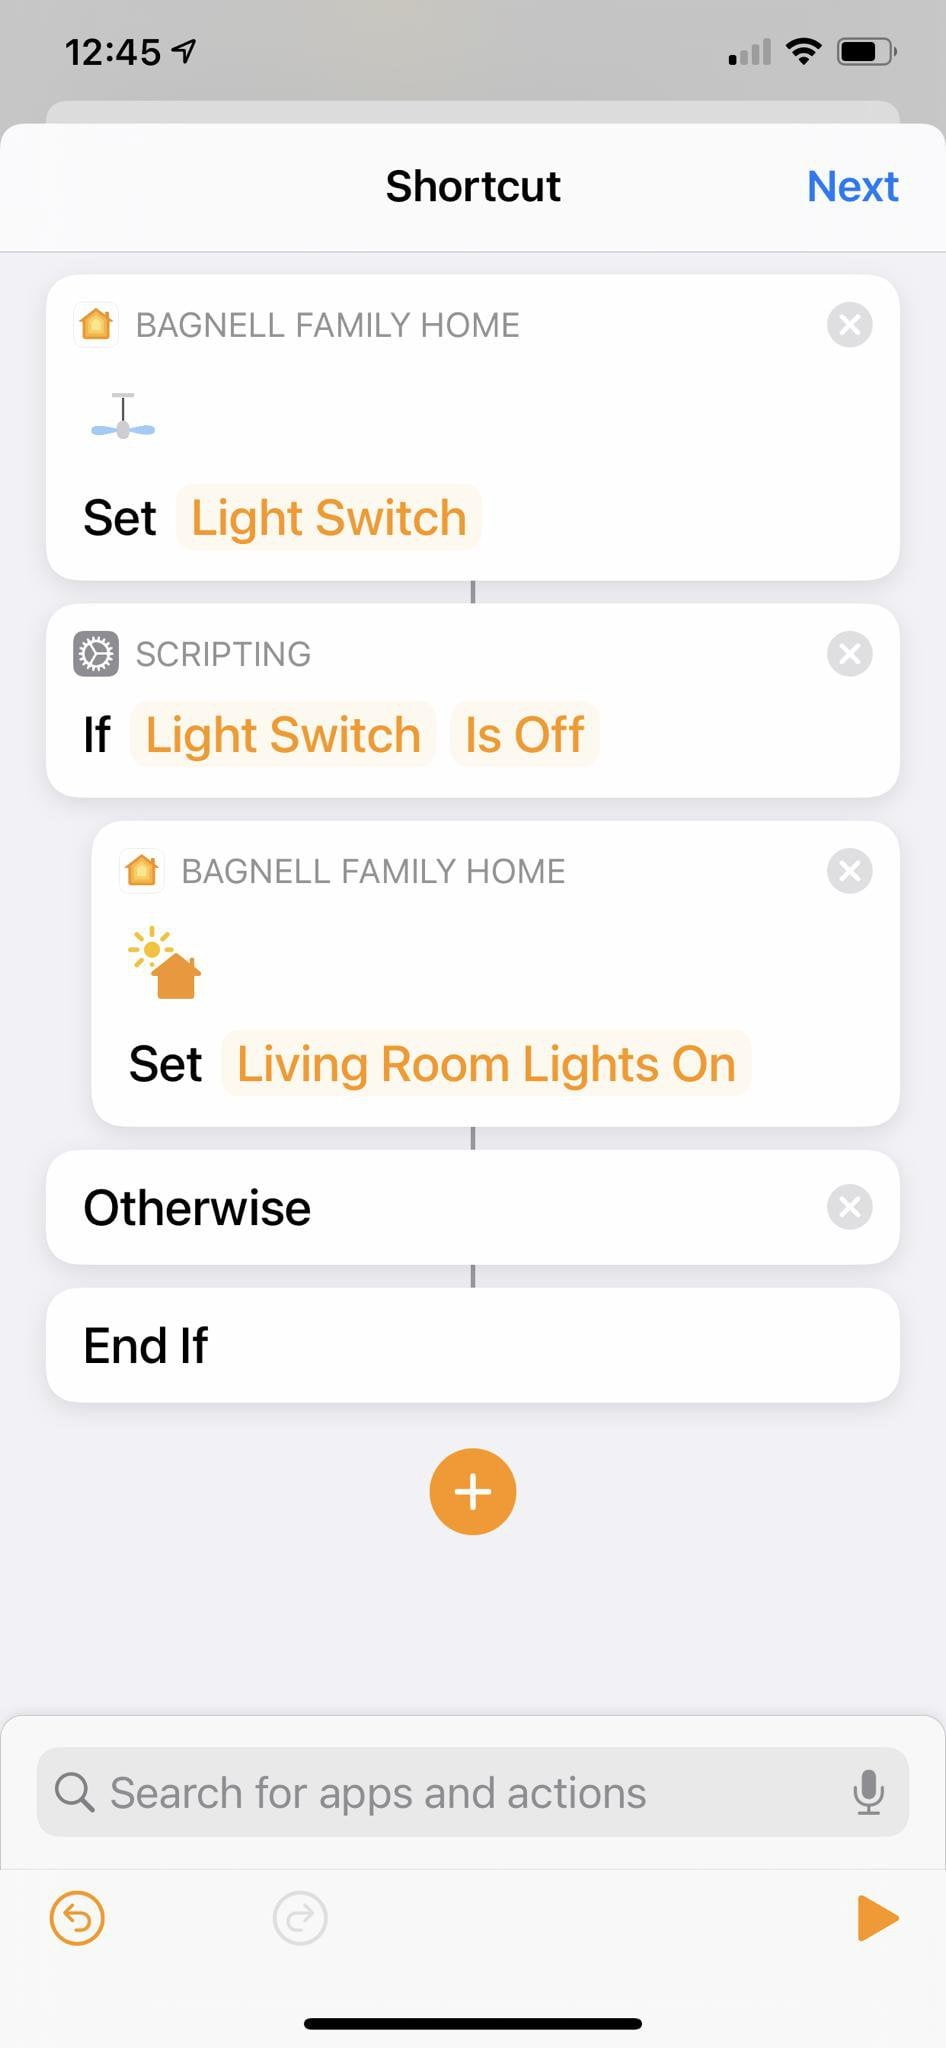 Should HomeKit devices be before or after the if condition